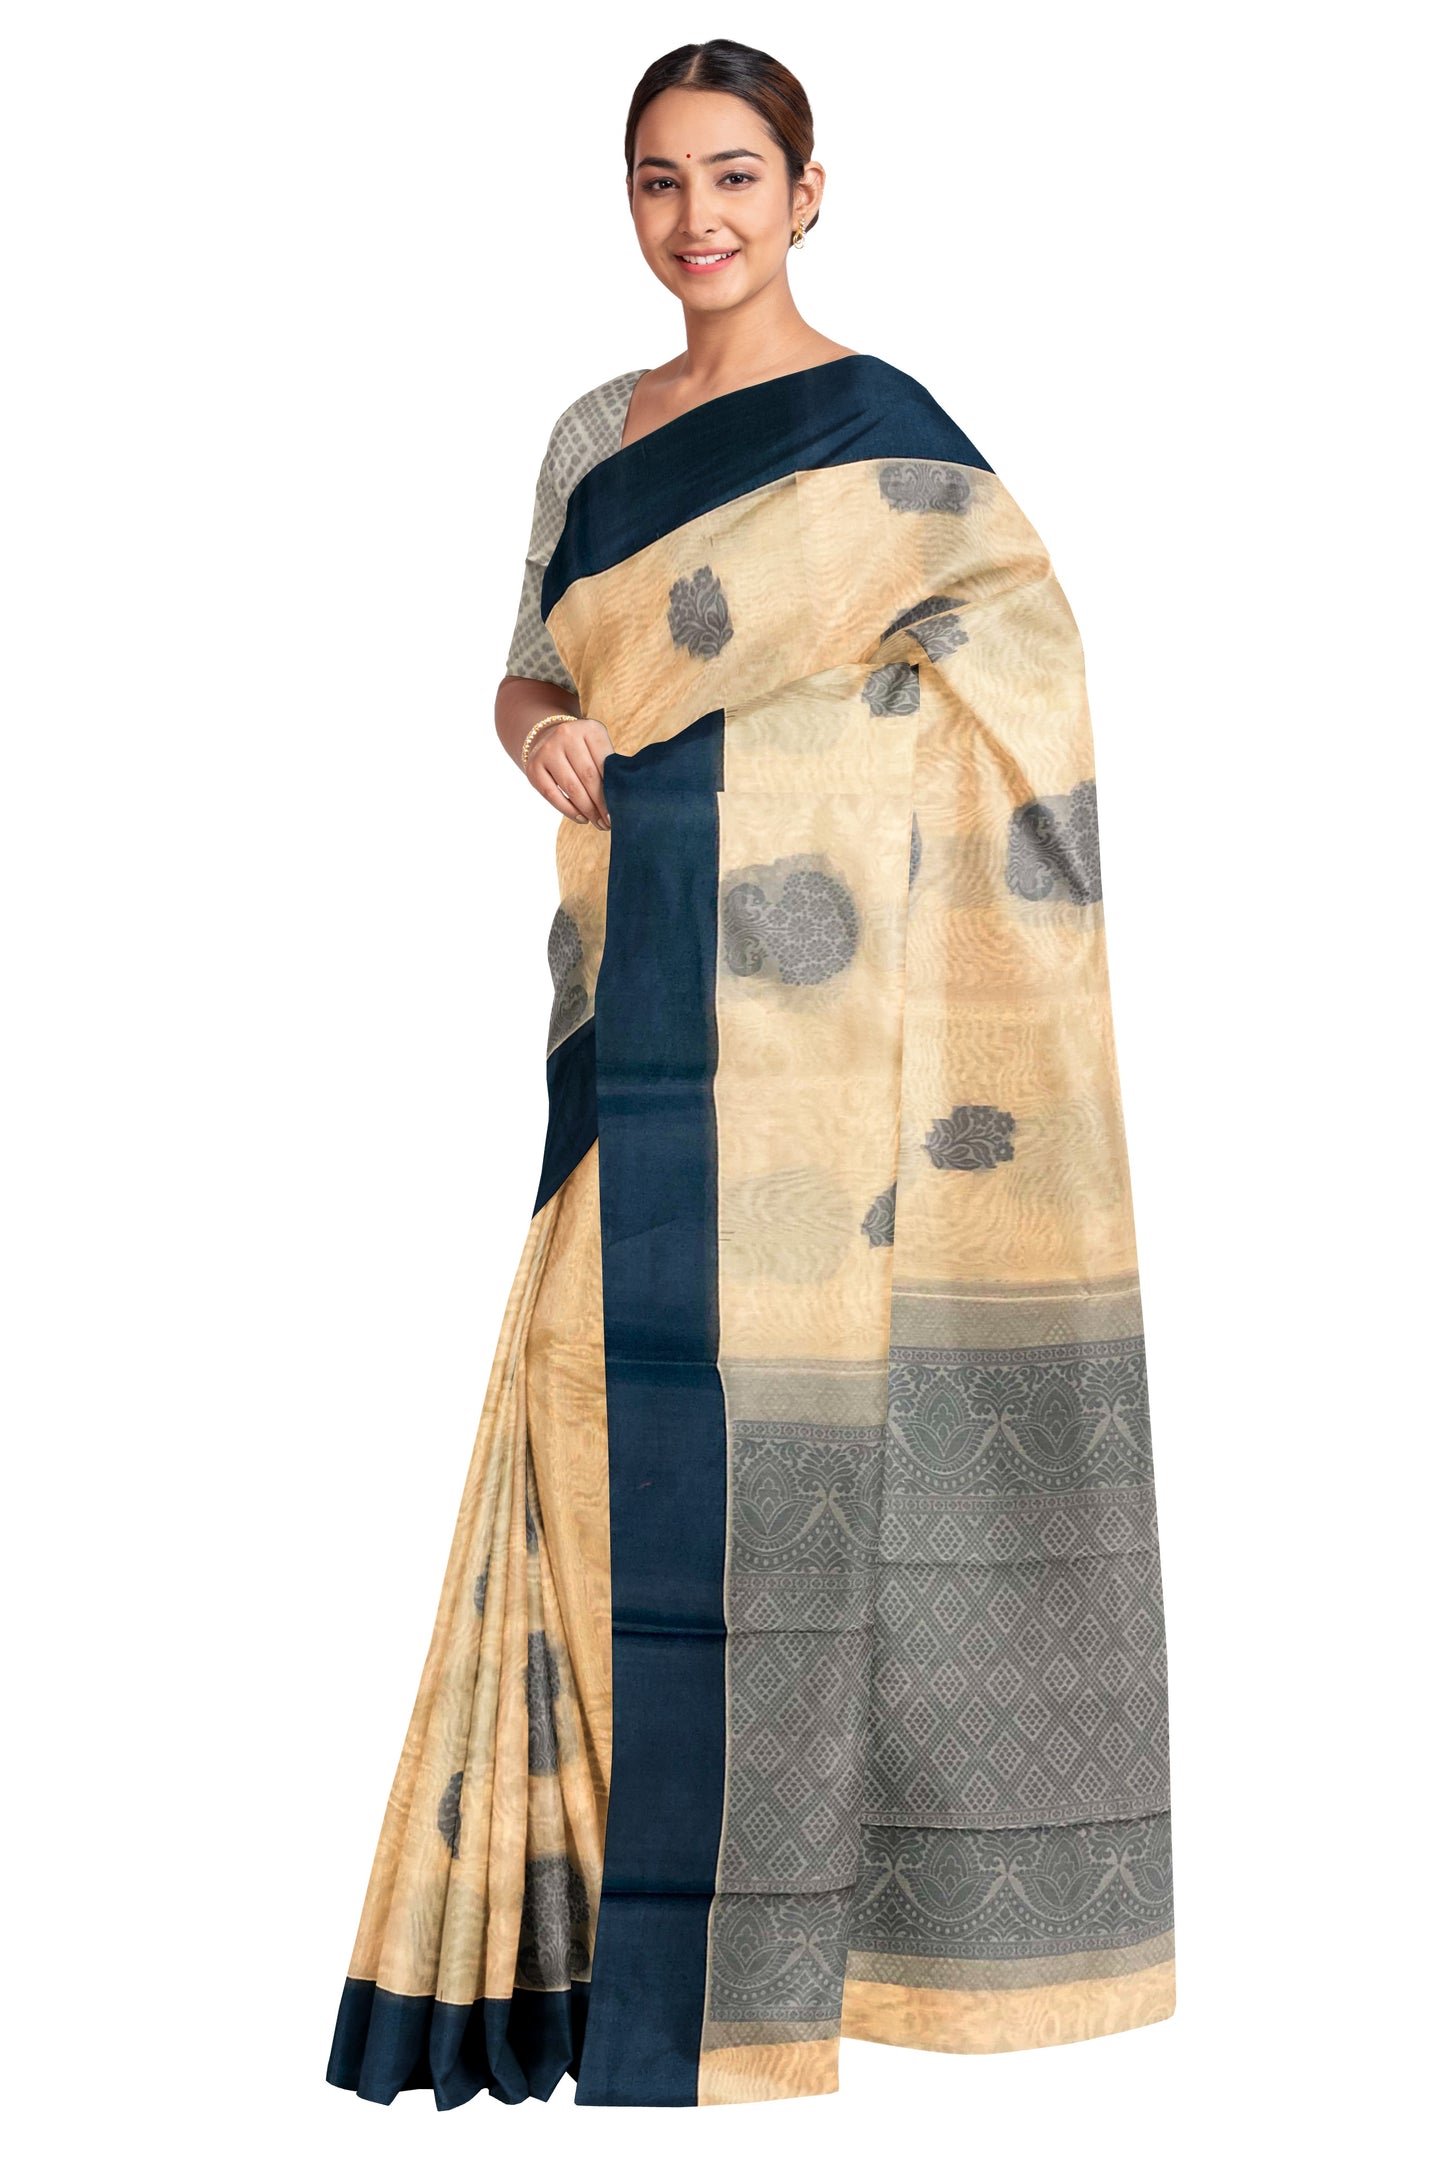 Southloom Sico Gadwal Semi Silk Saree in Cream and Dark Blue with Floral Motifs (Blouse Piece with Work)